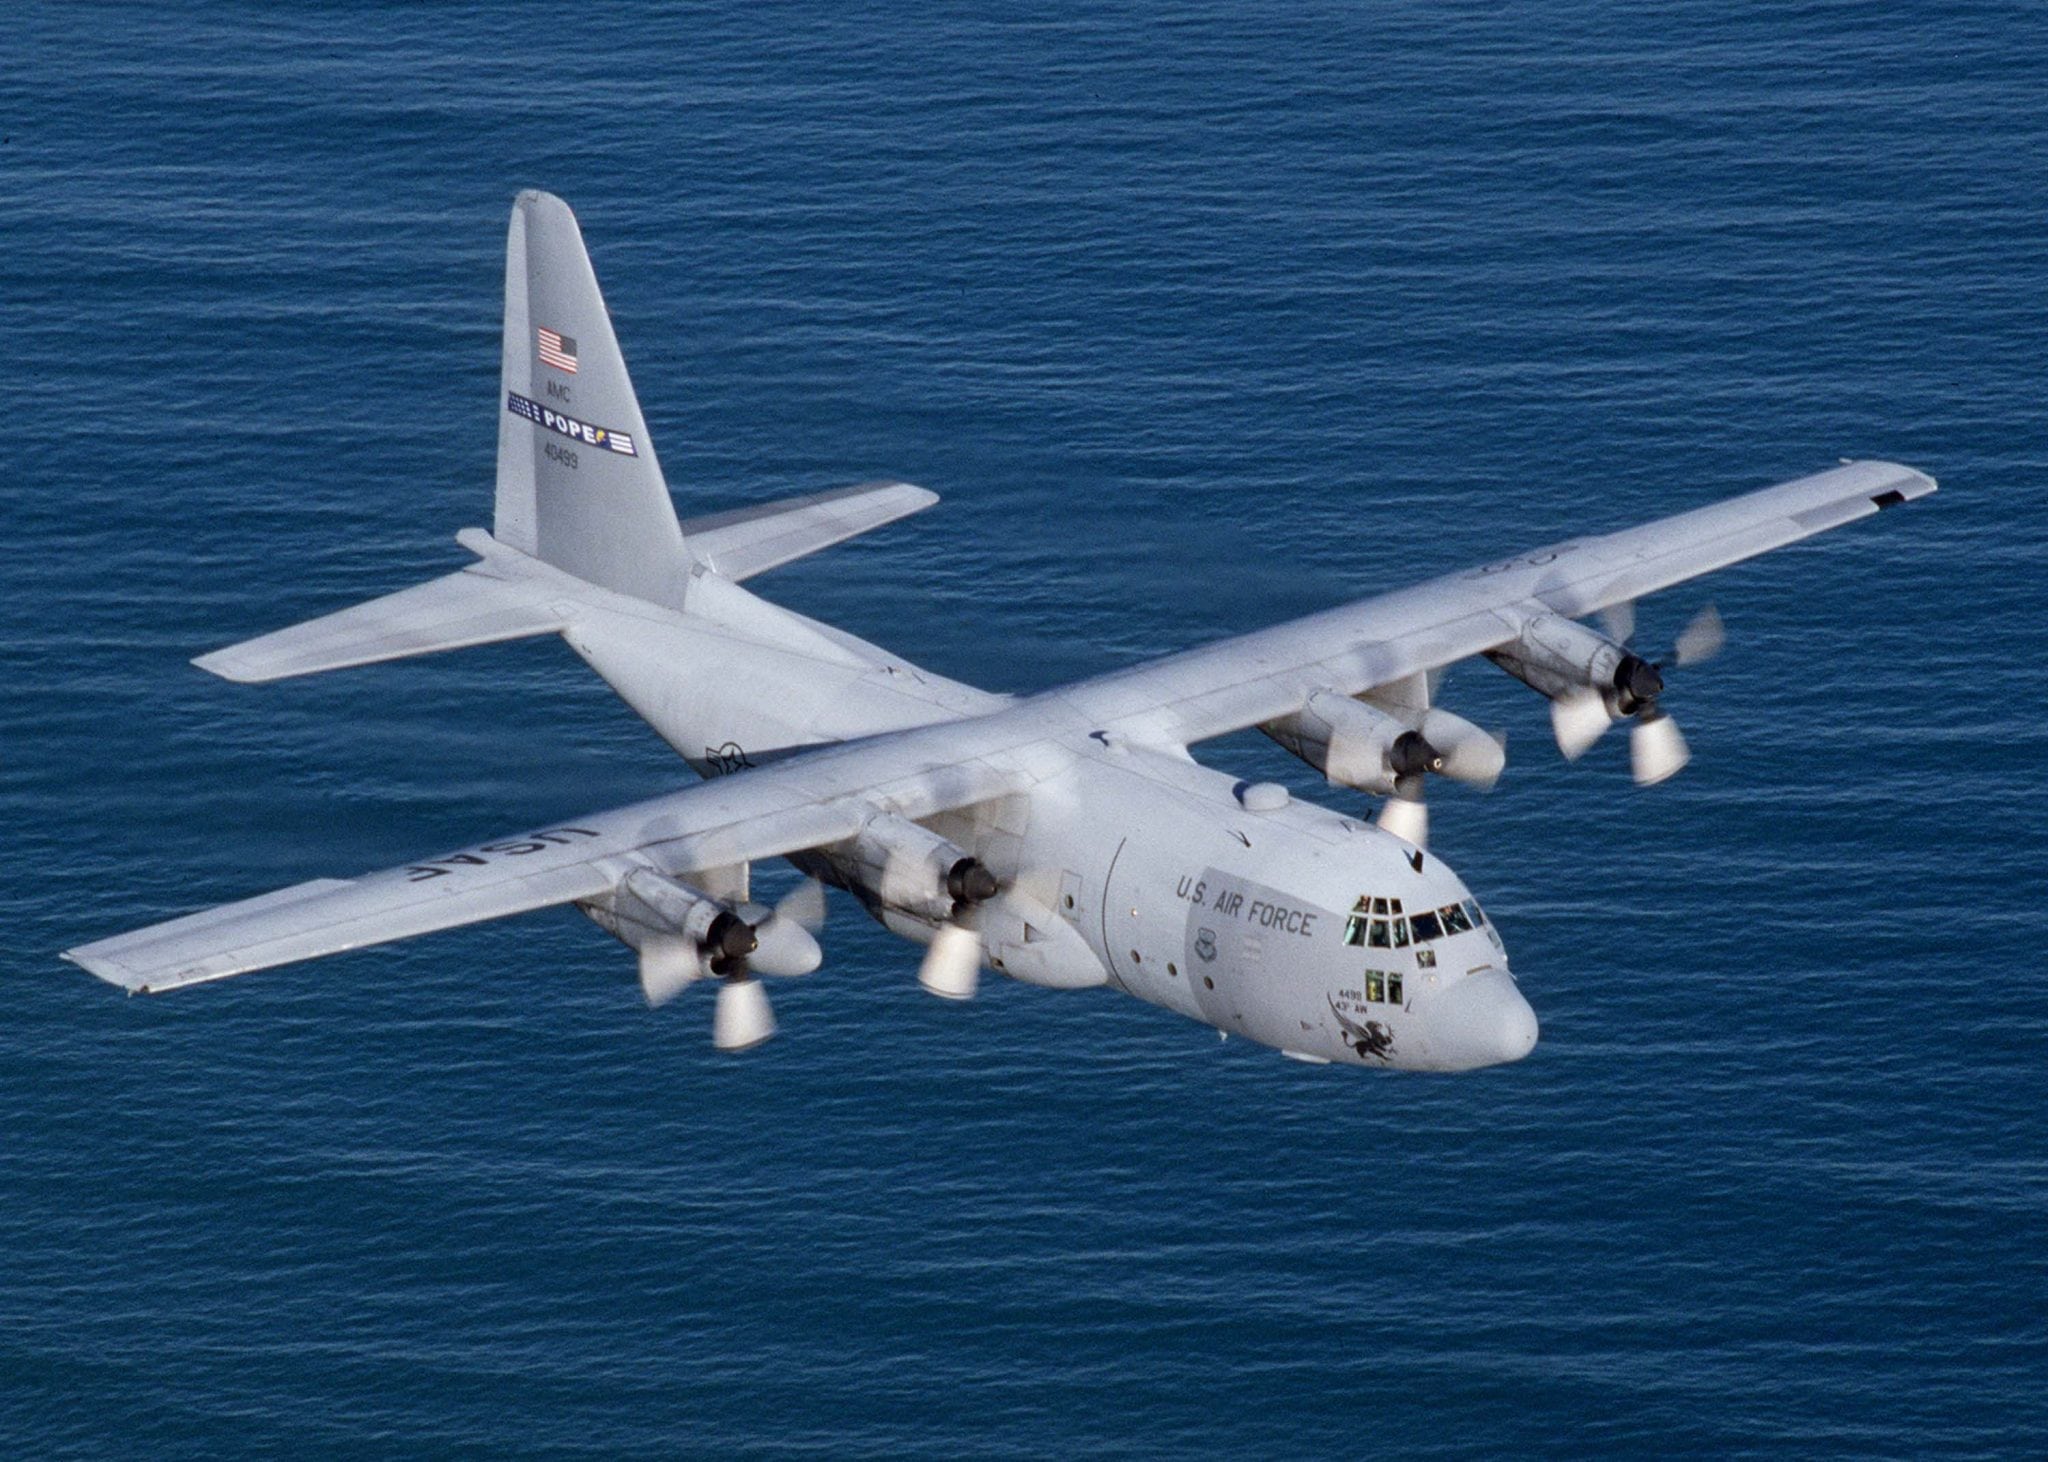 The USAF C-130, included in the aircraft Heroux-Devtek will supply landing gear repair and overhaul